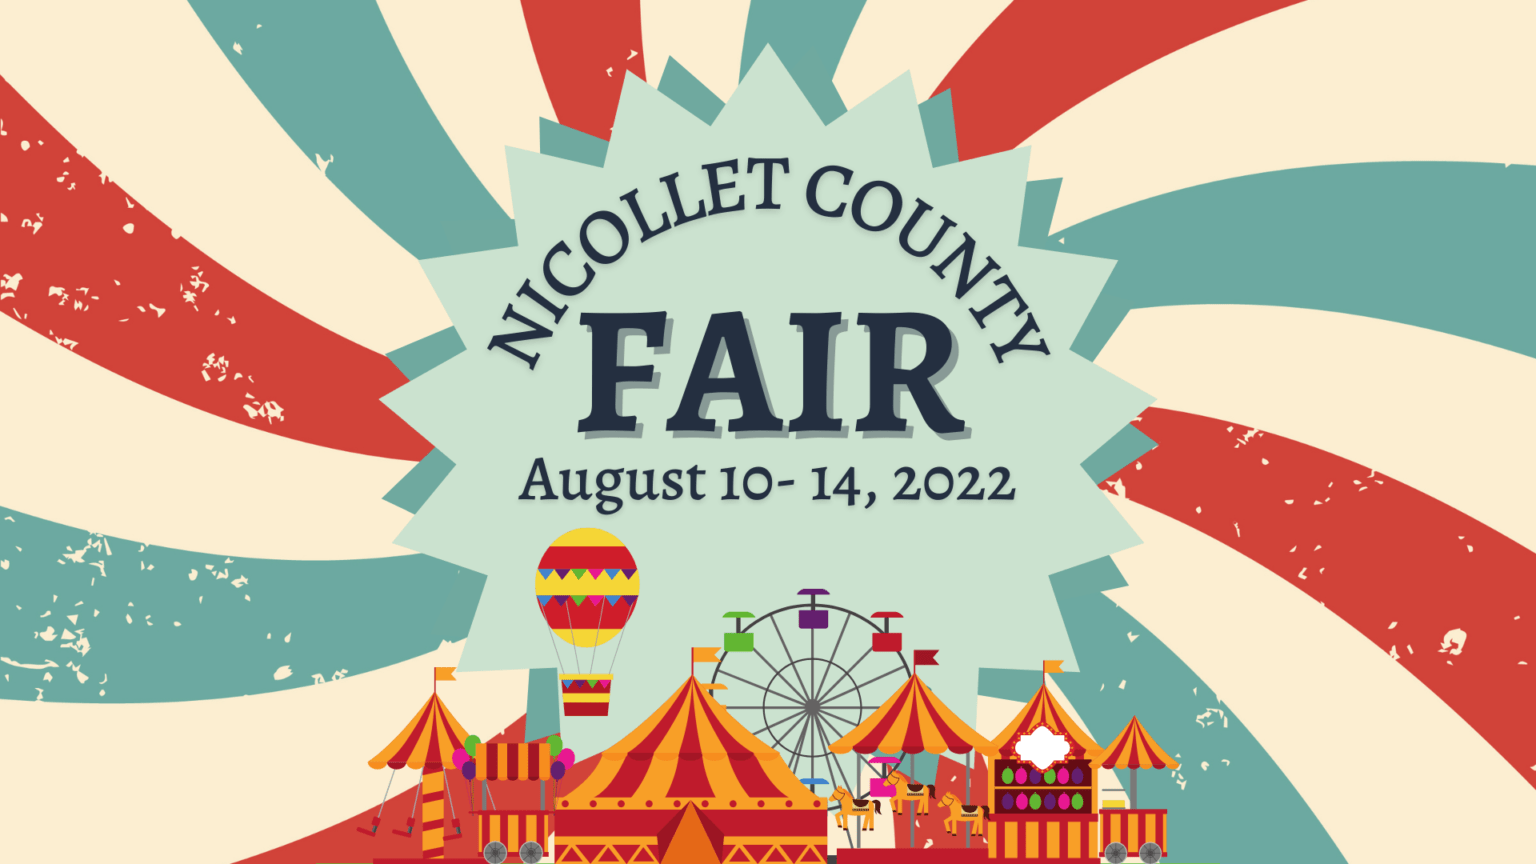 Join NCHS at the Nicollet County Fair